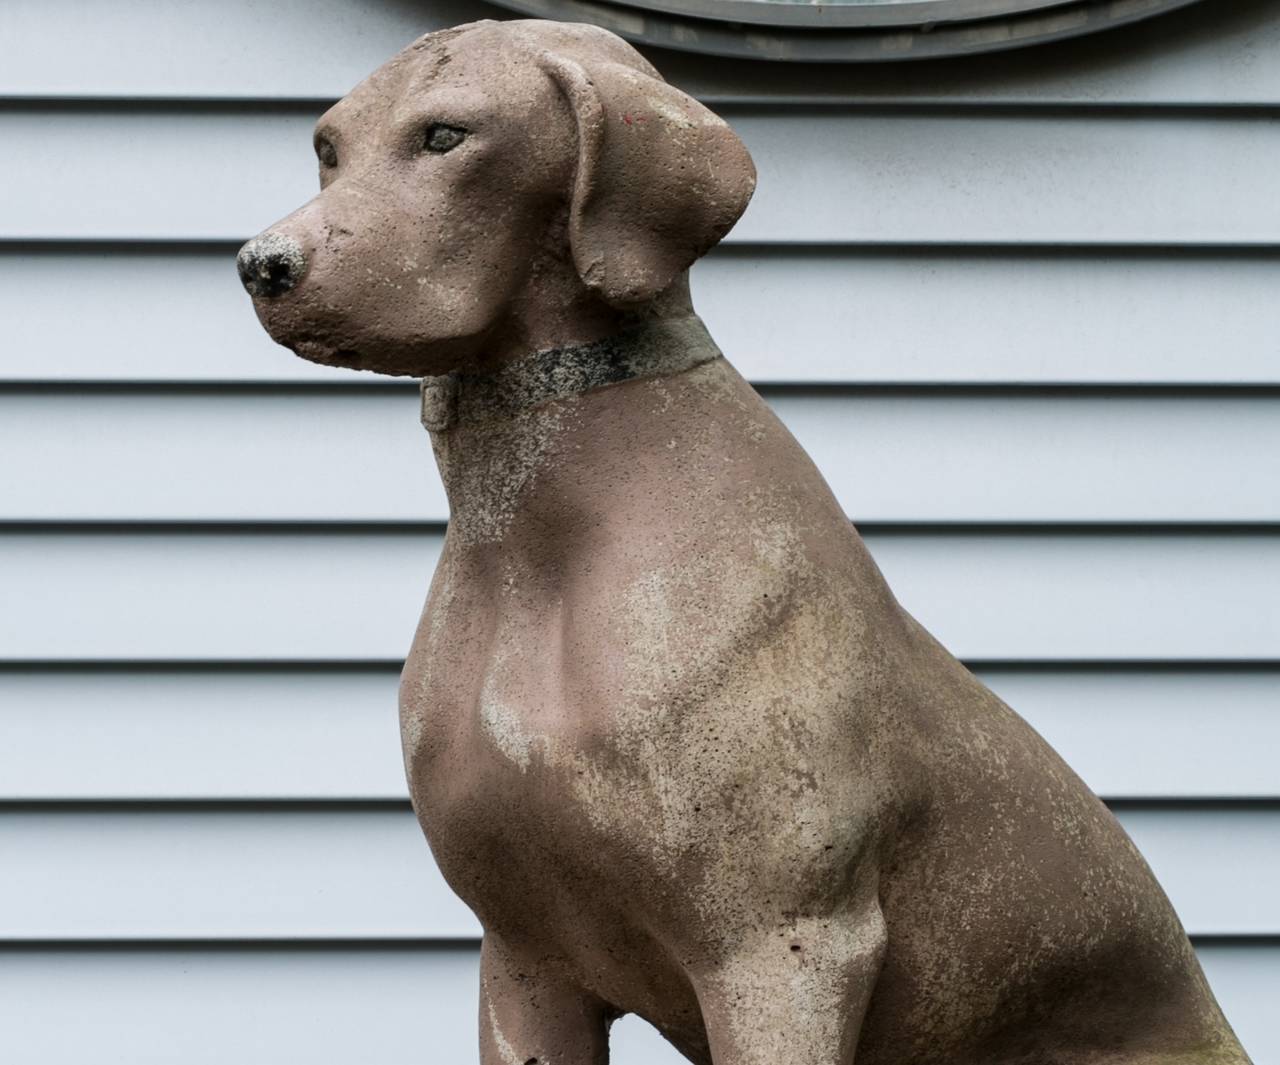 Vintage concrete dog statue from Holland, circa 1950s. Hand-sculpted and hand-painted. Would look great indoors or outdoors.